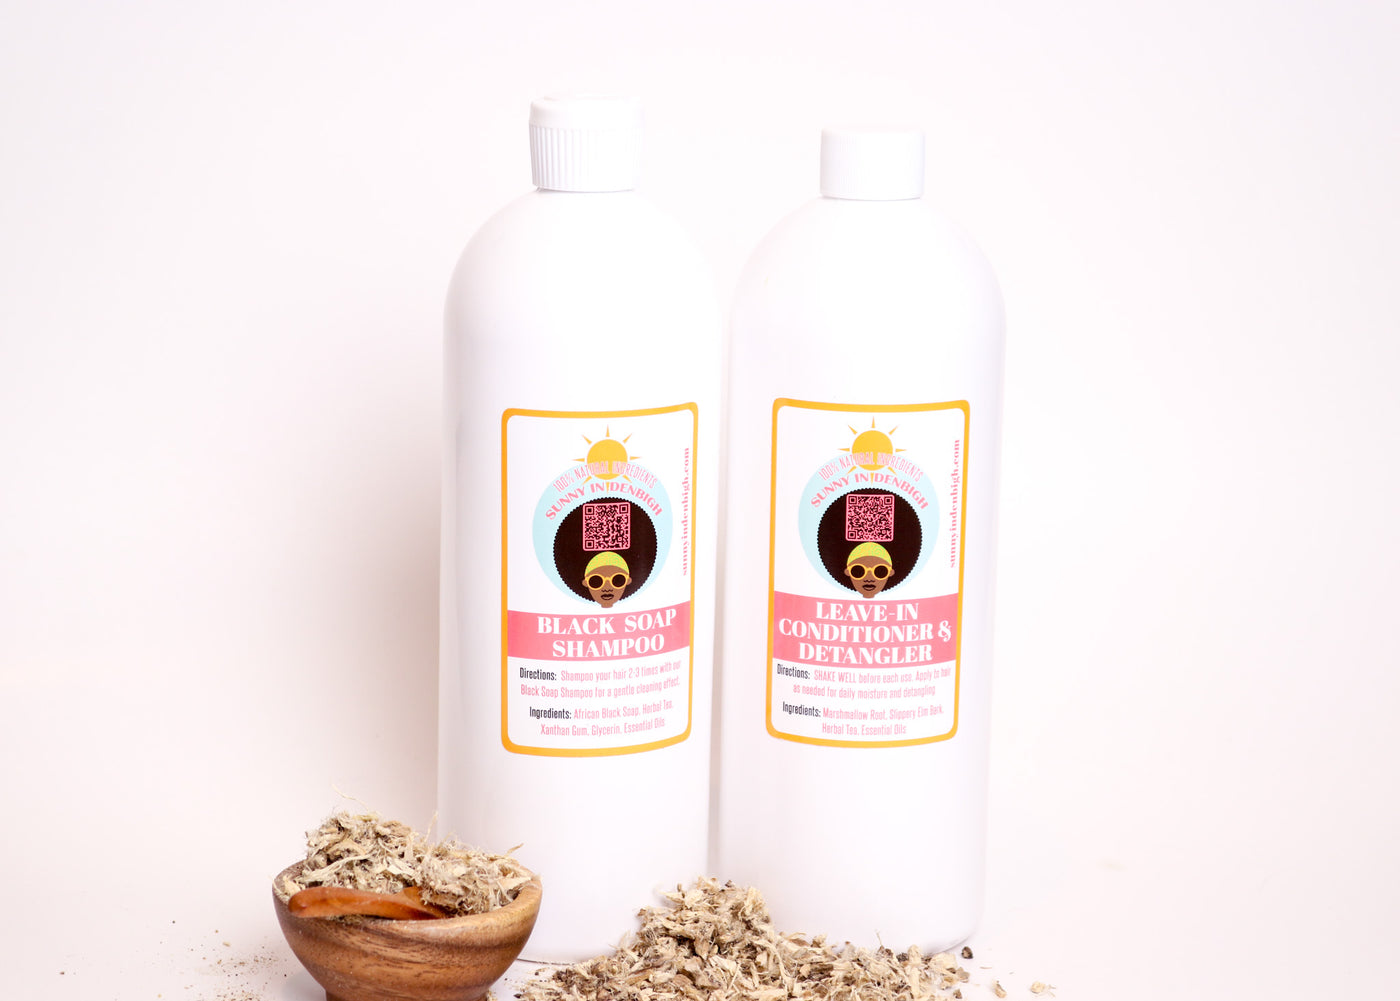 Our Wash Day Bundle is perfect for wash day and is packed with double the product to last you in between your Sunny in Denbigh Orders. Wash Day Bundle Includes: 32 oz Herbal Blacksoap Shampoo 32 oz Leave Conditioner/Detangler